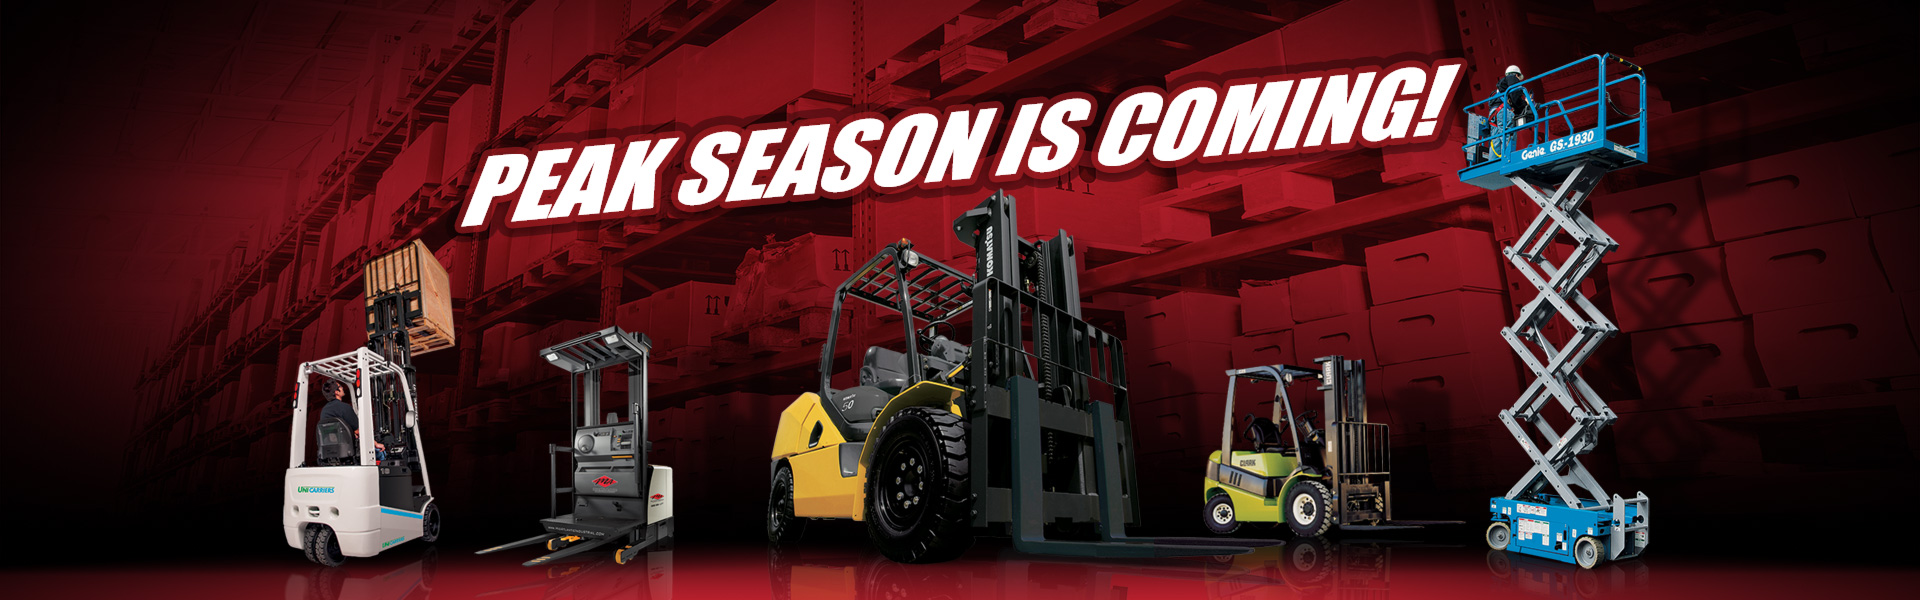 Peak Rental Season Is Coming For Forklifts & Material Handling Equipment in Lancaster County and the surrounding communities.